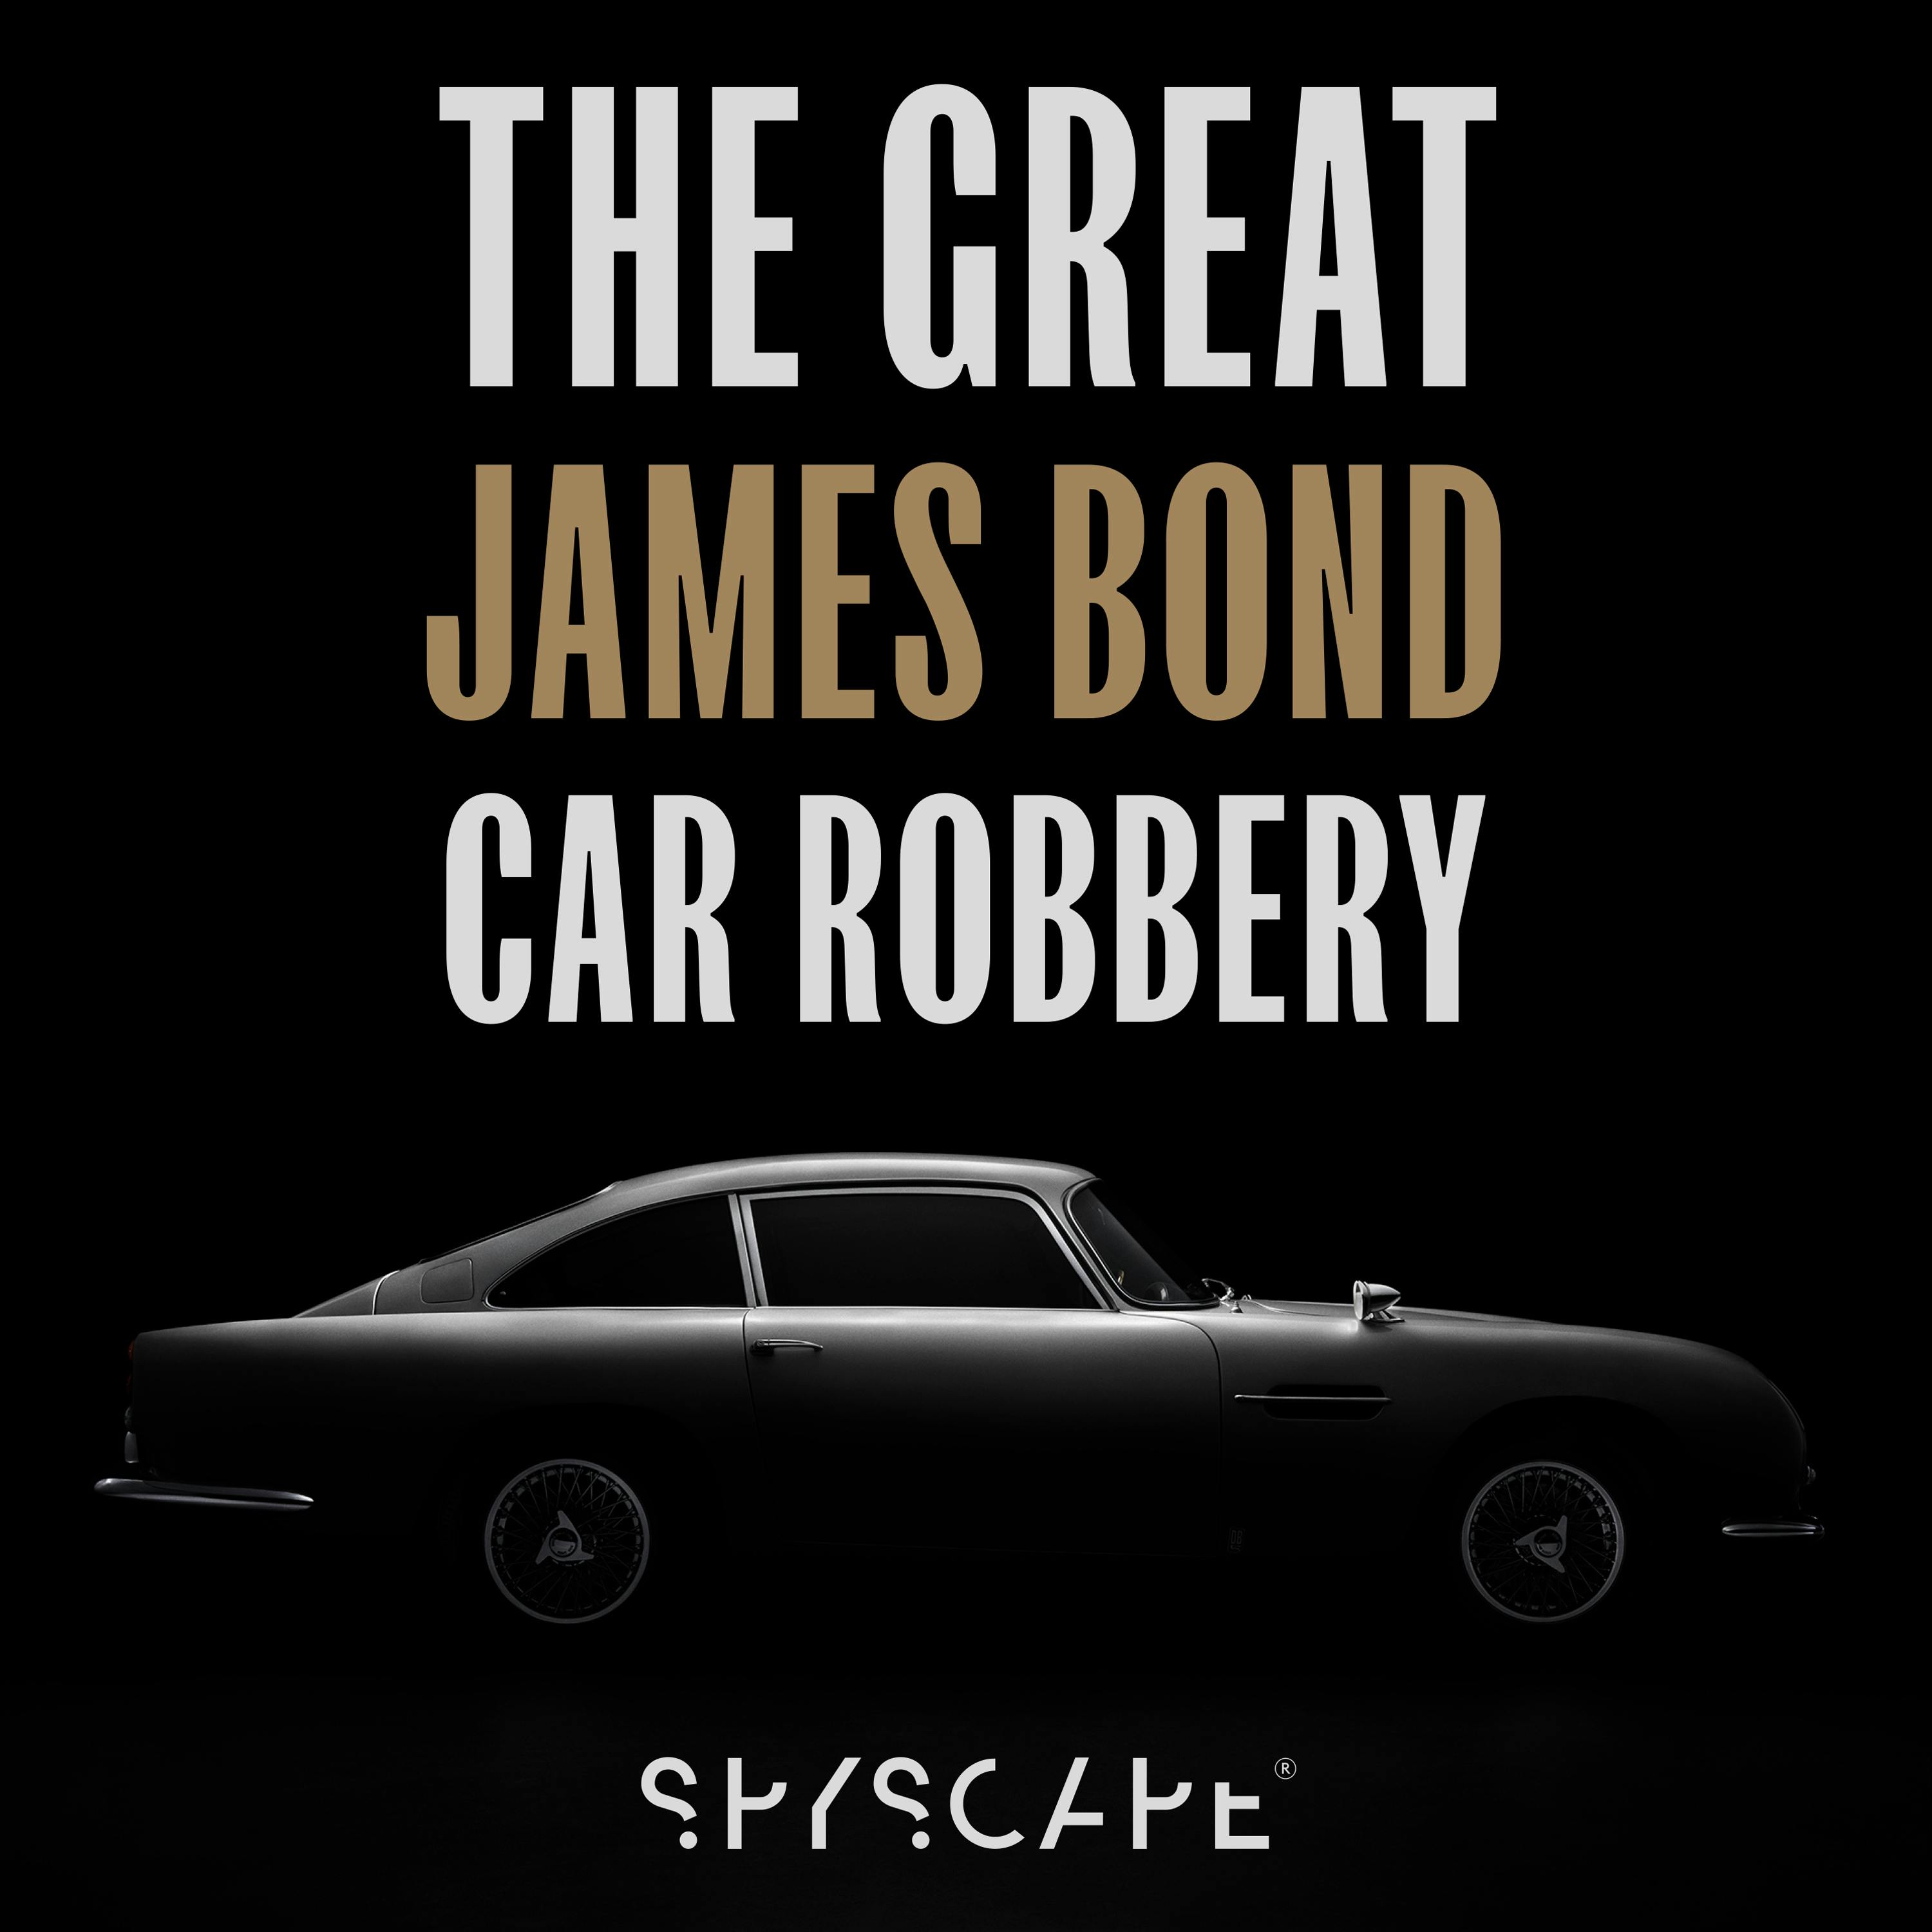 Introducing... The Great James Bond Car Robbery